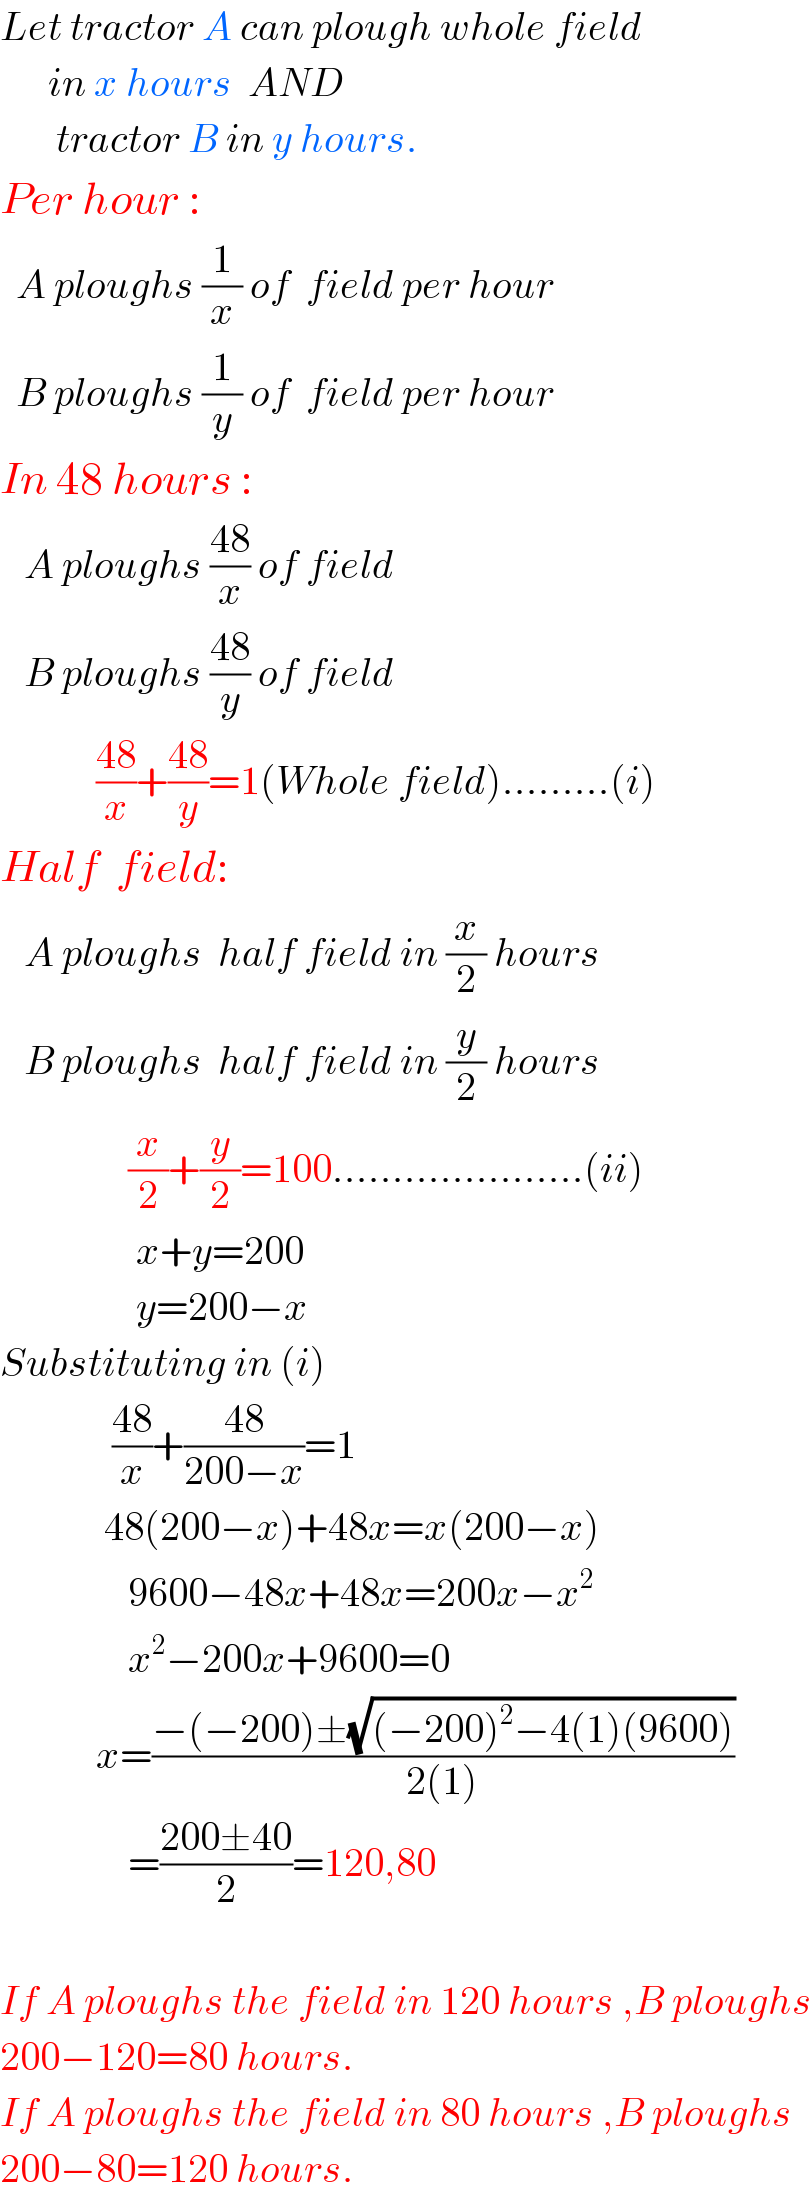 Let tractor A can plough whole field        in x hours  AND         tractor B in y hours.  Per hour :    A ploughs (1/x) of  field per hour    B ploughs (1/y) of  field per hour  In 48 hours :     A ploughs ((48)/x) of field     B ploughs ((48)/y) of field              ((48)/x)+((48)/y)=1(Whole field).........(i)  Half  field:     A ploughs  half field in (x/2) hours     B ploughs  half field in (y/2) hours                  (x/2)+(y/2)=100.....................(ii)                   x+y=200                   y=200−x  Substituting in (i)                ((48)/x)+((48)/(200−x))=1               48(200−x)+48x=x(200−x)                  9600−48x+48x=200x−x^2                   x^2 −200x+9600=0              x=((−(−200)±(√((−200)^2 −4(1)(9600))))/(2(1)))                  =((200±40)/2)=120,80    If A ploughs the field in 120 hours ,B ploughs  200−120=80 hours.  If A ploughs the field in 80 hours ,B ploughs  200−80=120 hours.  